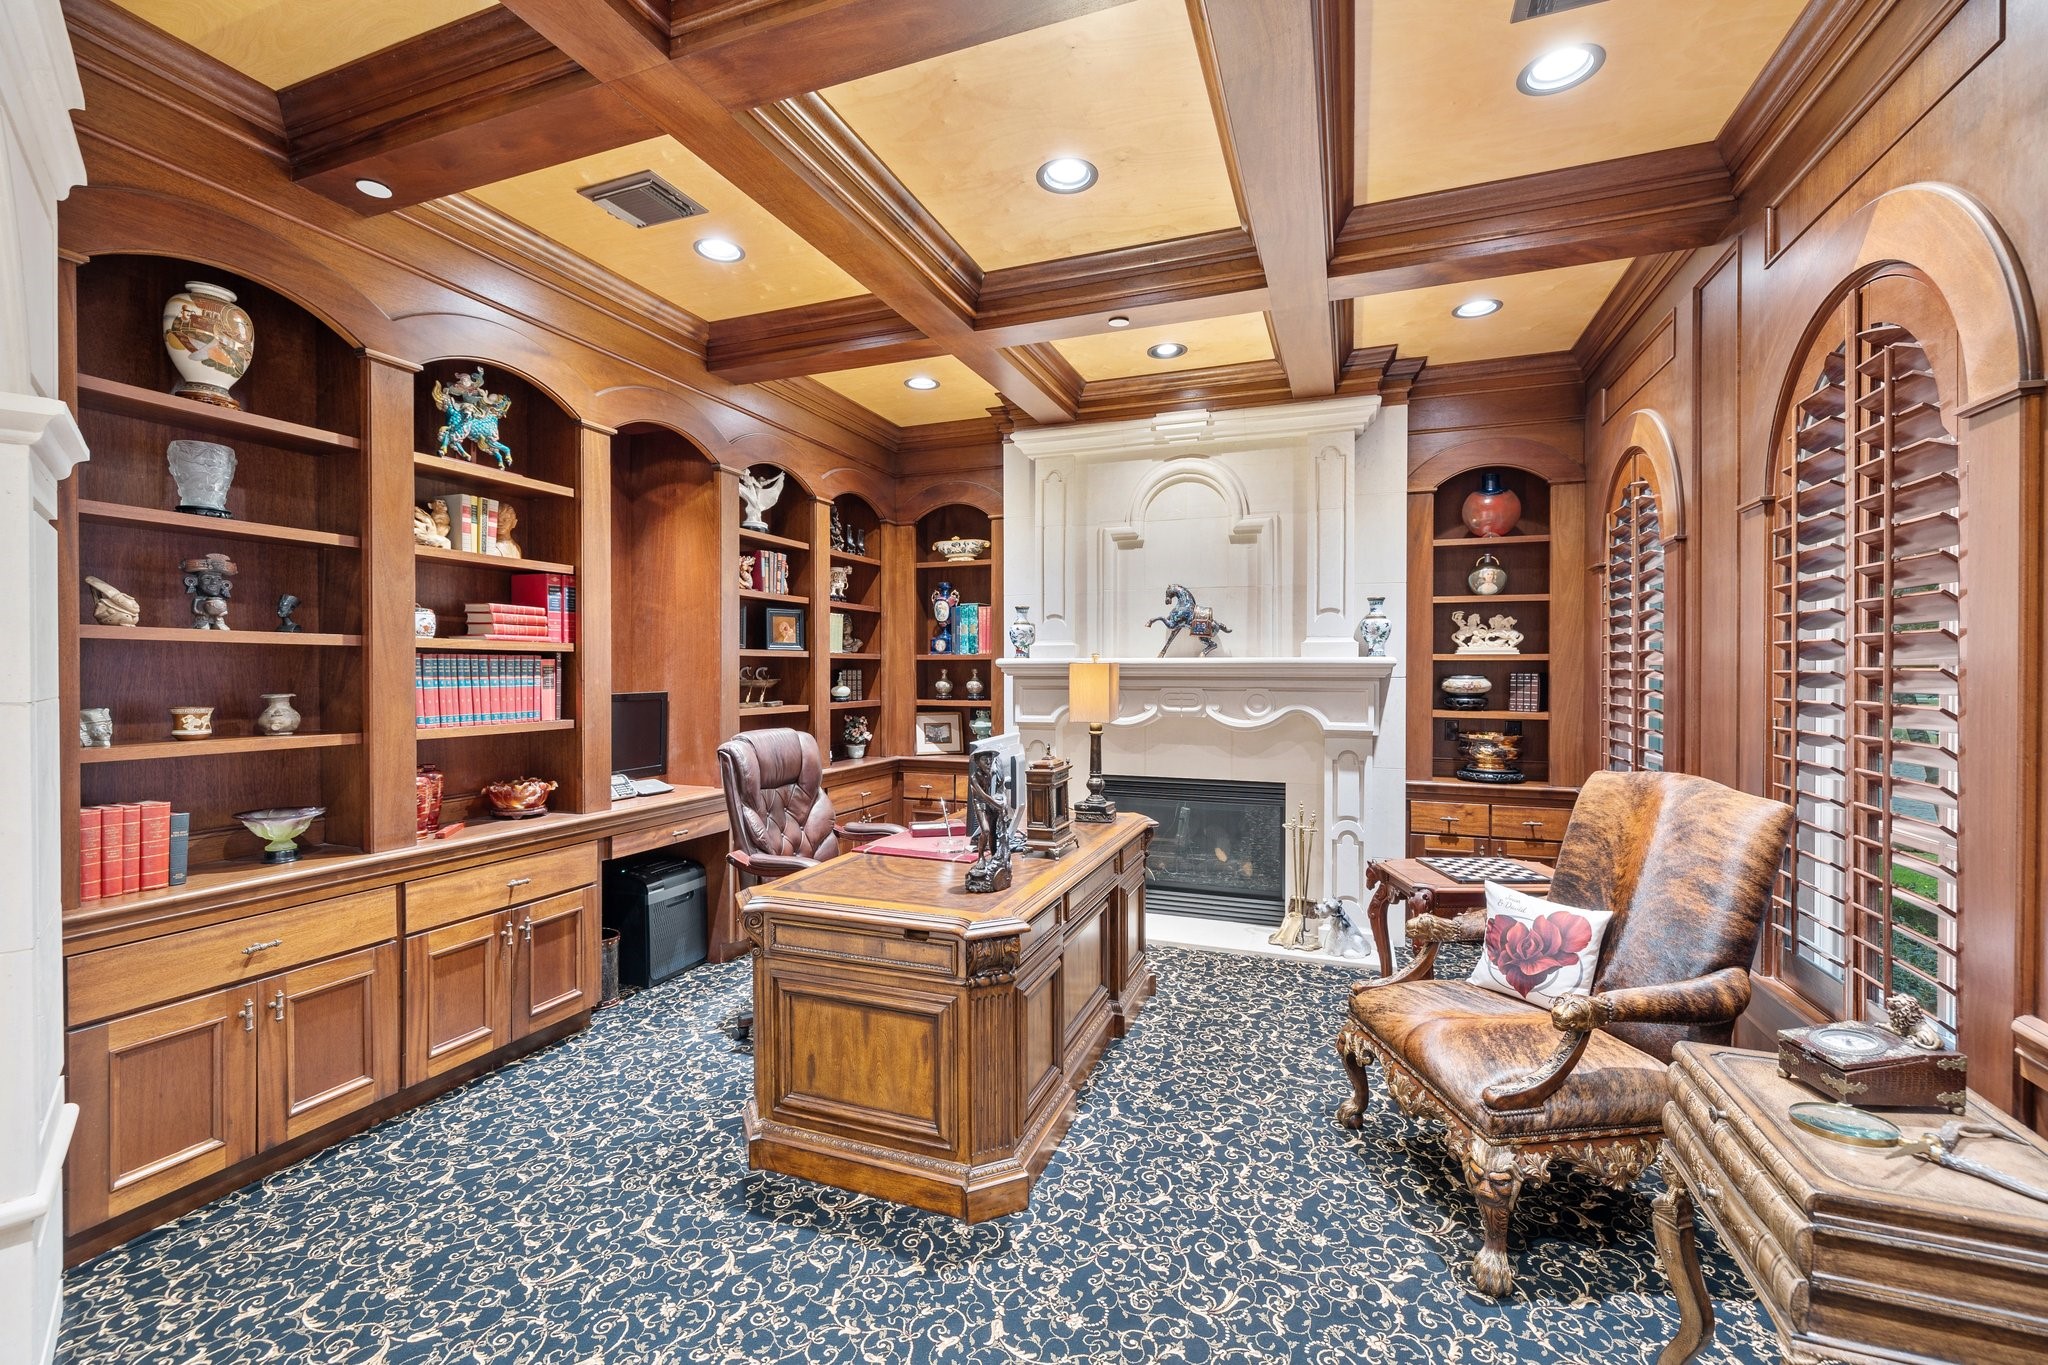 Step into the study, a space that exudes sophistication and warmth. Limestone accents and a cozy fireplace create a commanding, yet inviting atmosphere. The dark wood shelving provides ample room for your personal library or to showcase your prized collectibles.